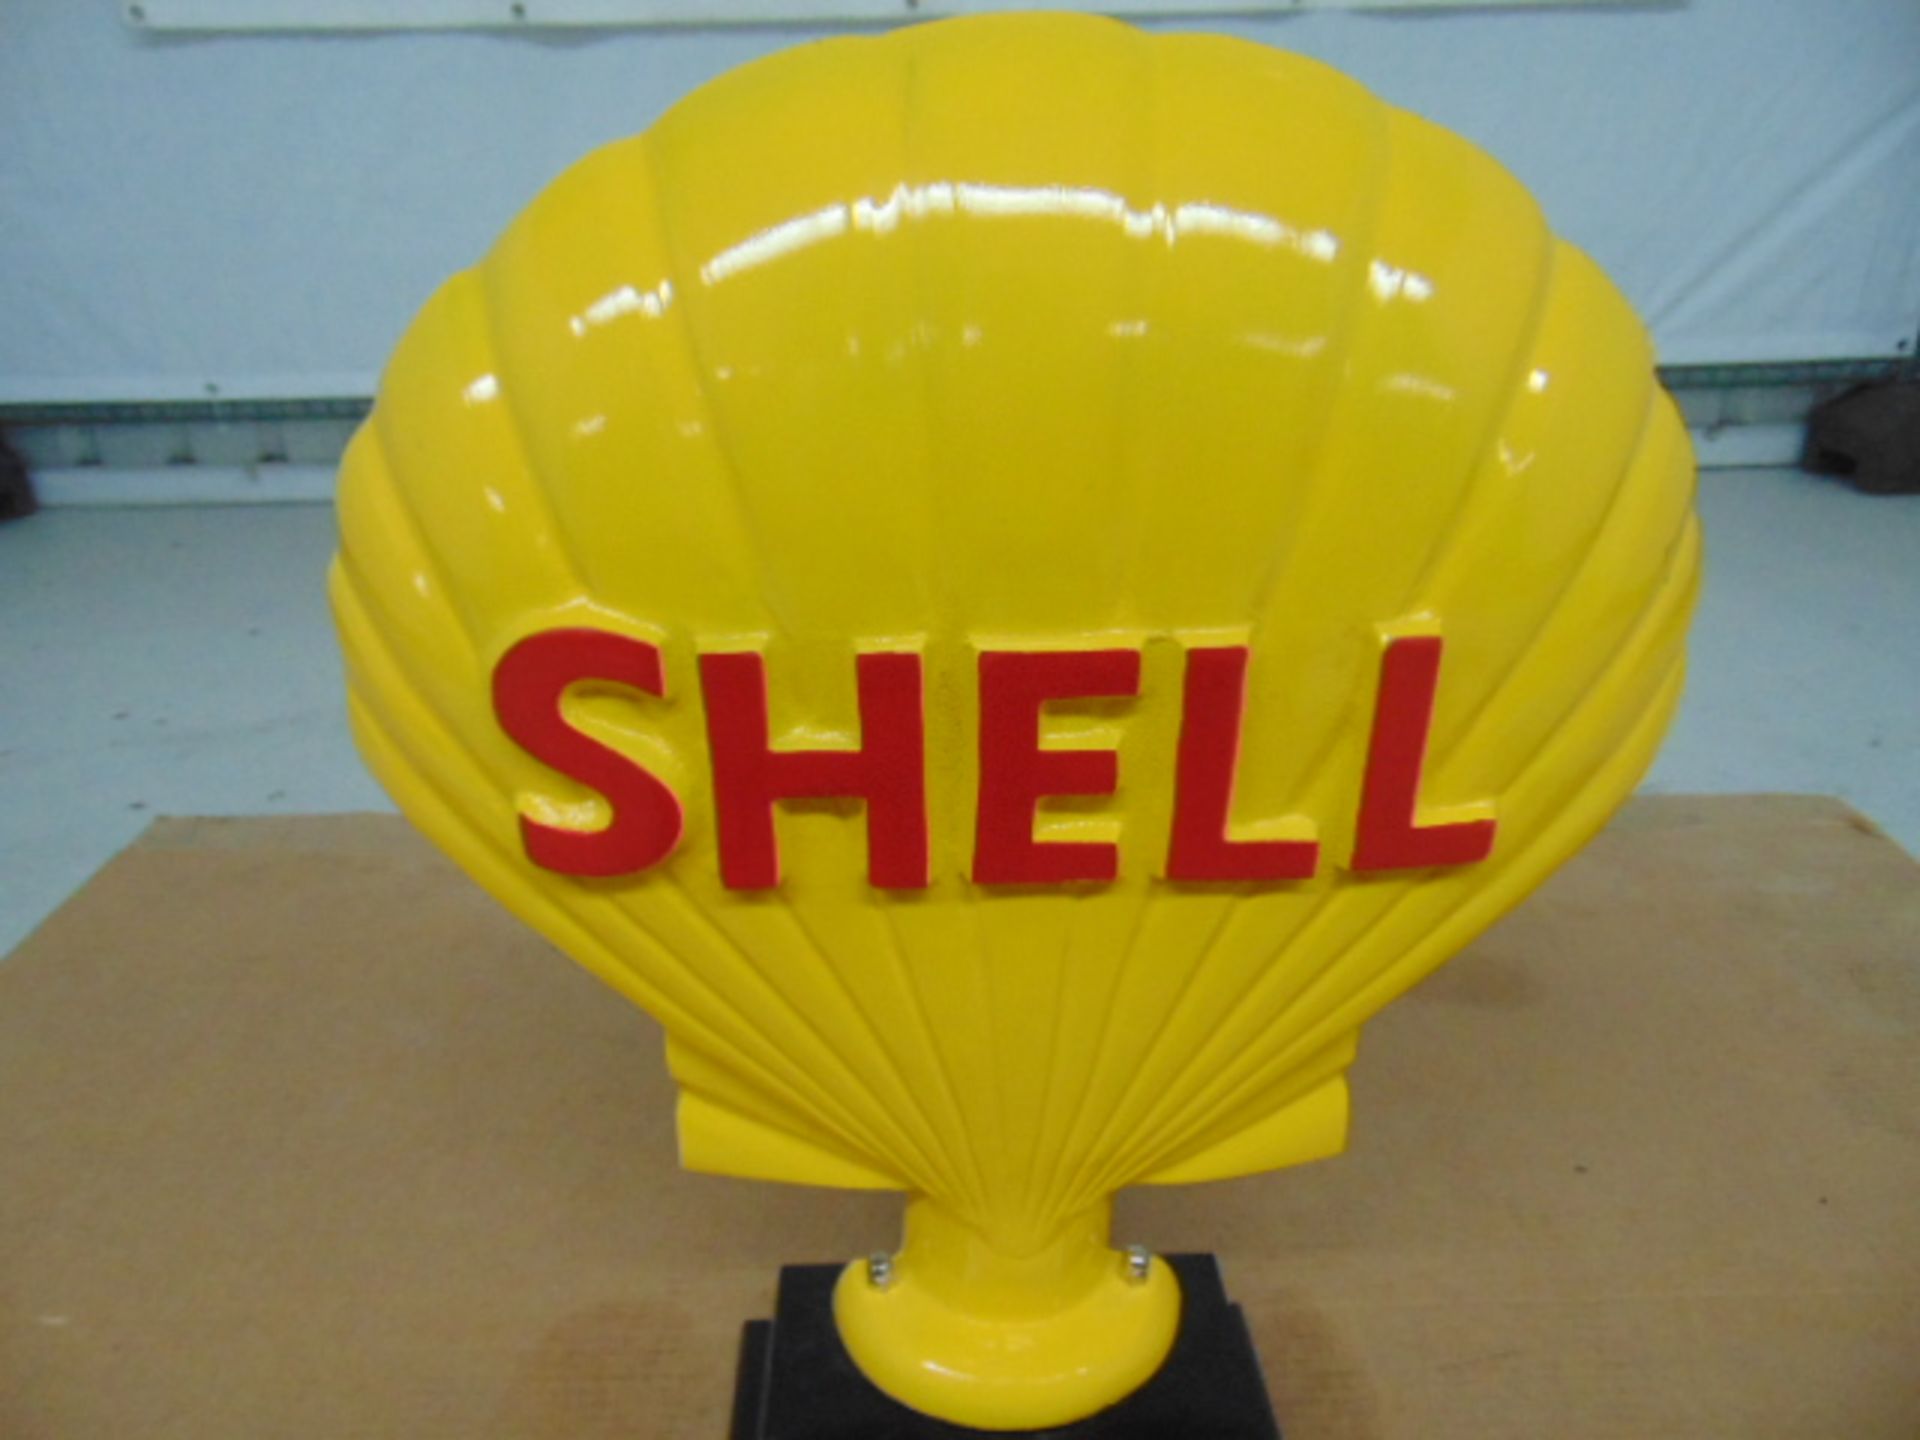 Shell Cast Aluminium Advertising Plaque with Stand - Image 2 of 5